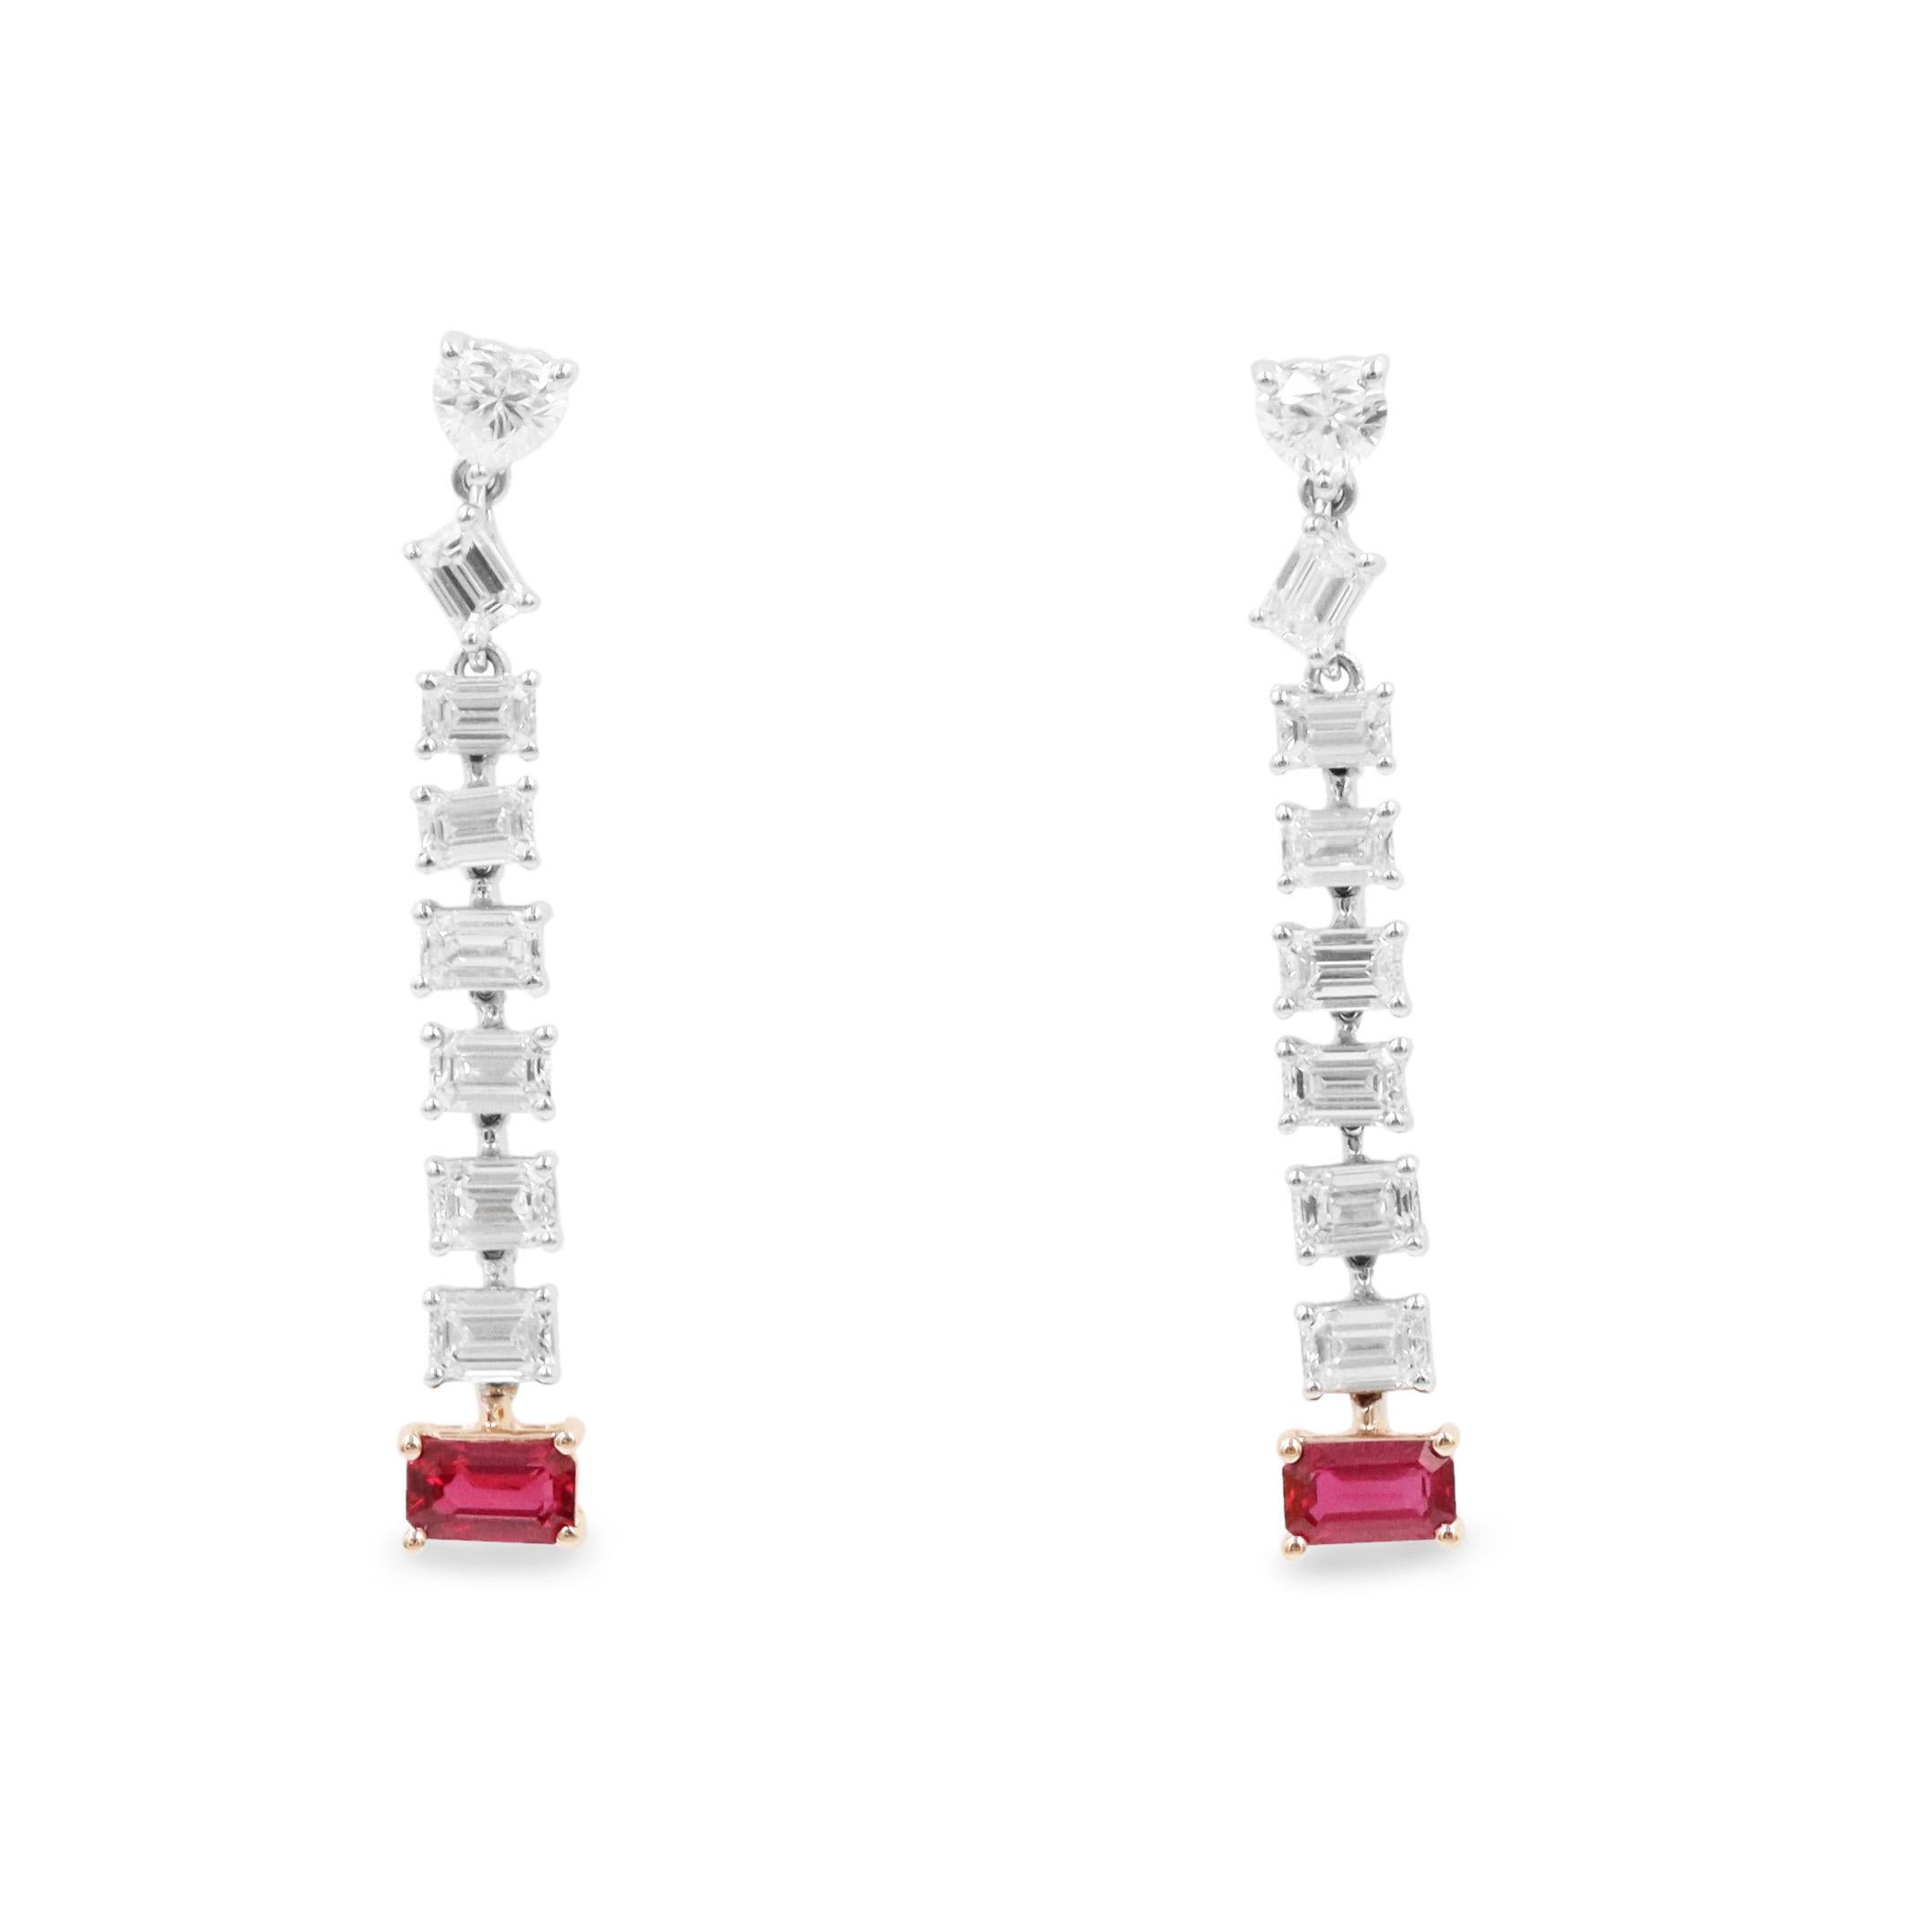 From the vault at Emilio Jewelry located on New York's iconic Fifth Avenue,
Diamond Weight: 2.51 carats D-F Vs1-Vs2 
Ruby Stone Weight: 0.76 carat vivid red Pigeon blood rubies 
Please inquire for additional details. All pieces are hand made in the